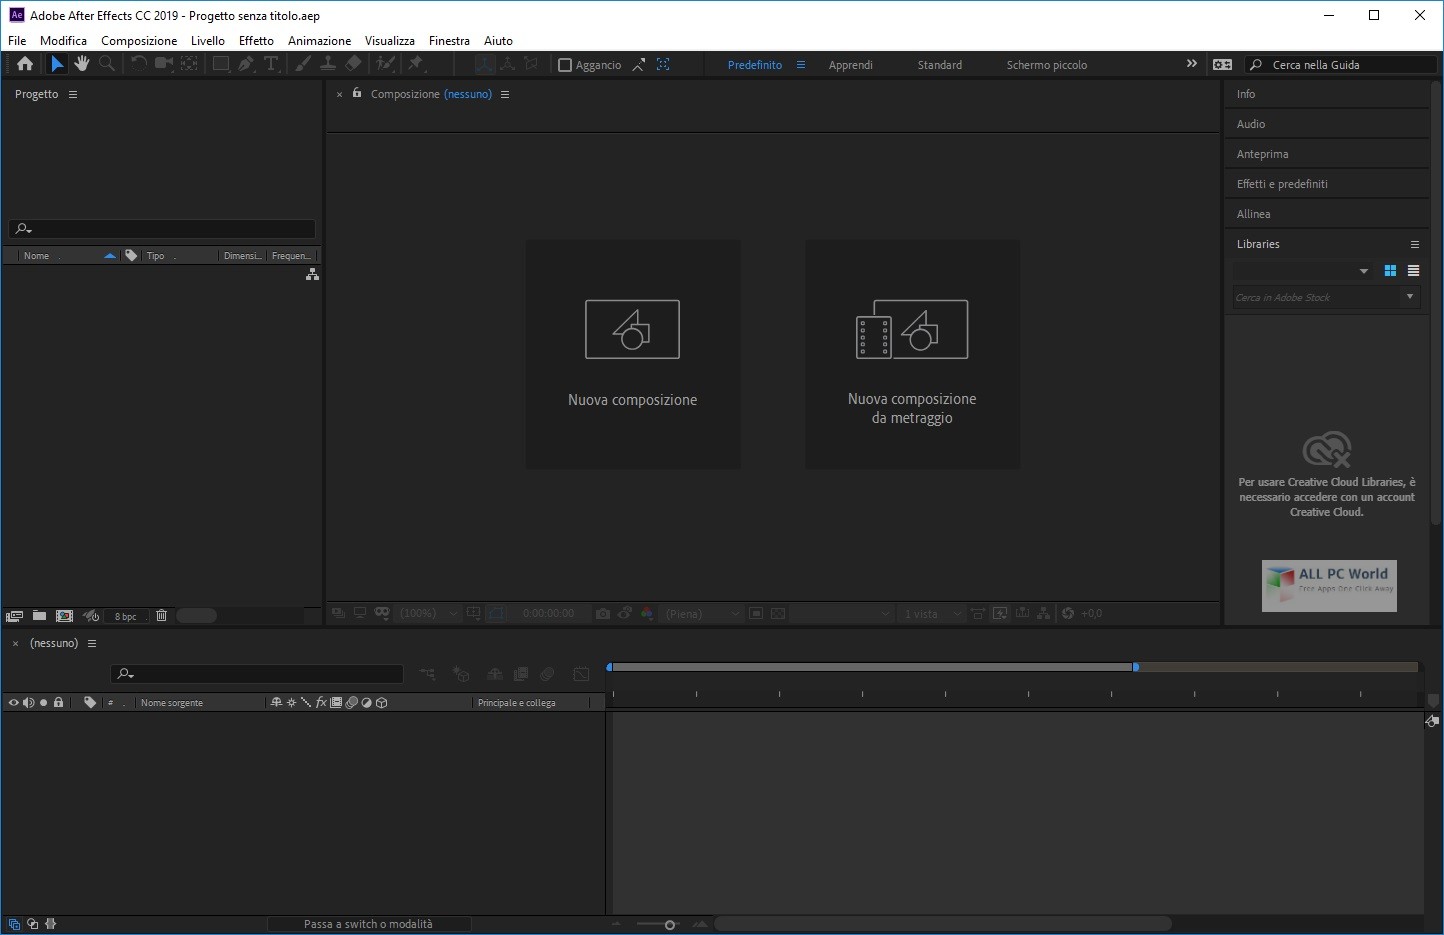 Adobe After Effects CC 2020 v17.0.2.26 Free Download